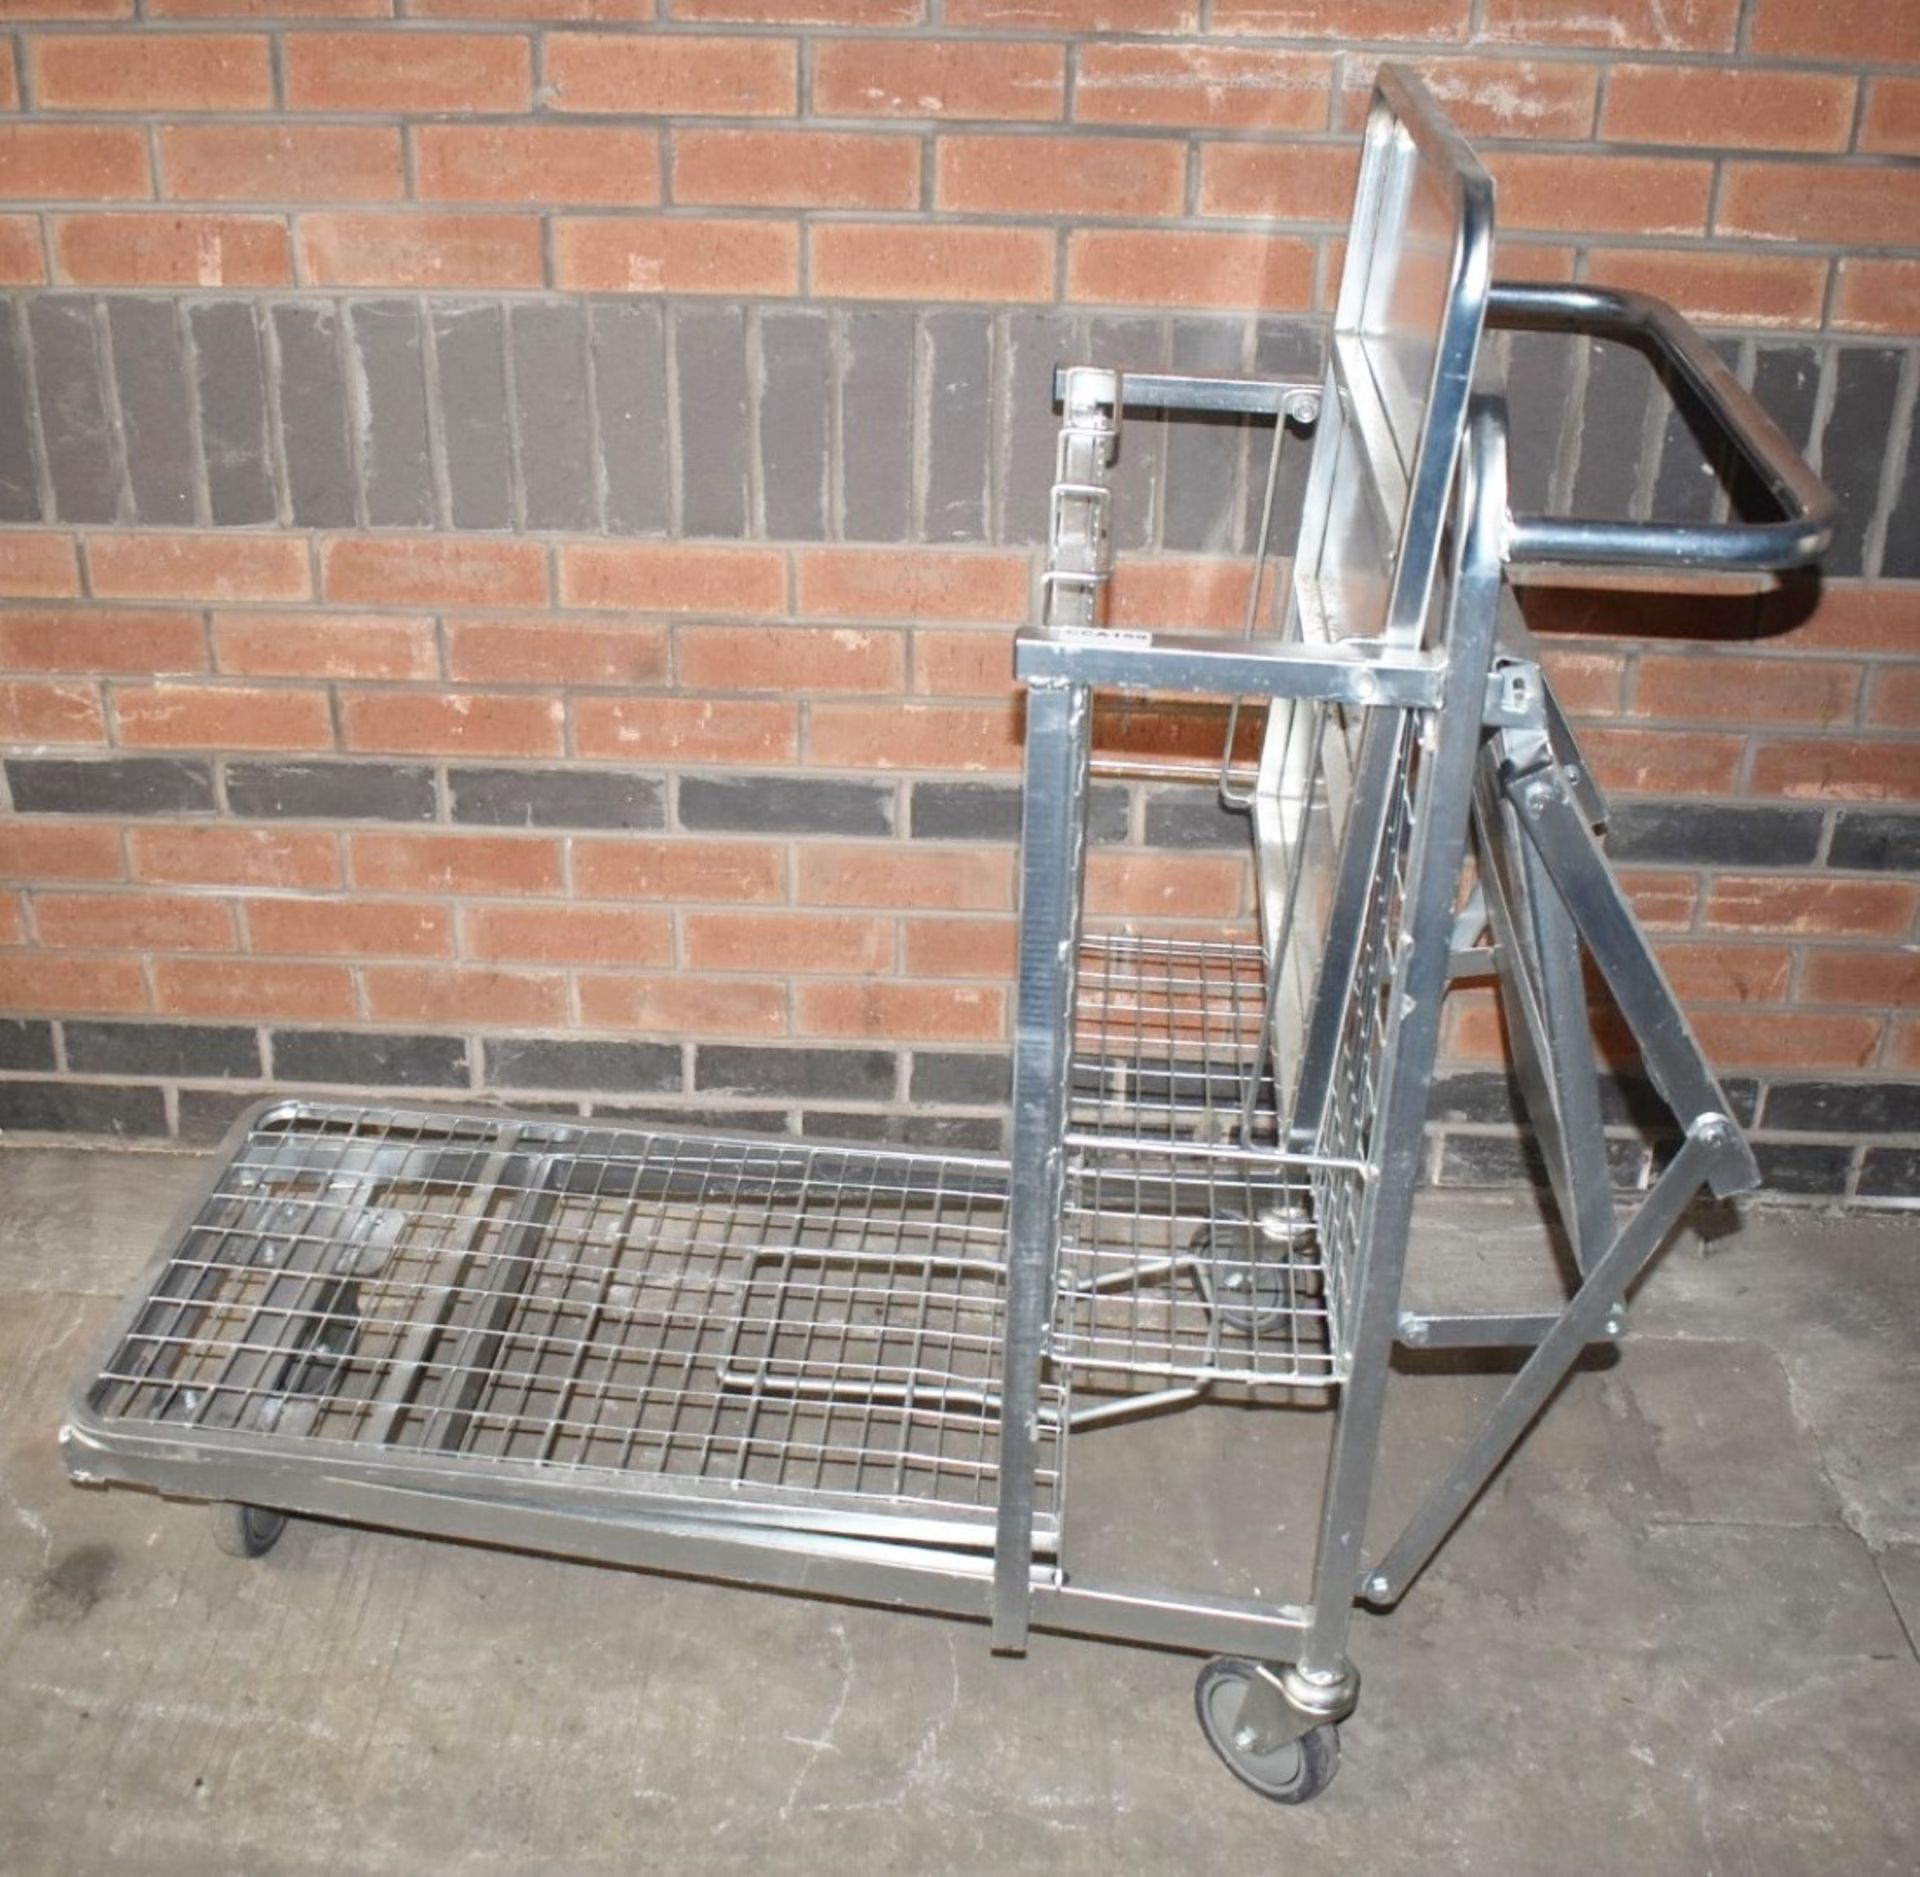 1 x Supermarket Retail Merchandising Trolley With Pull Out Step and Folding Shelf - CL595 - Ref: CCA - Image 2 of 12